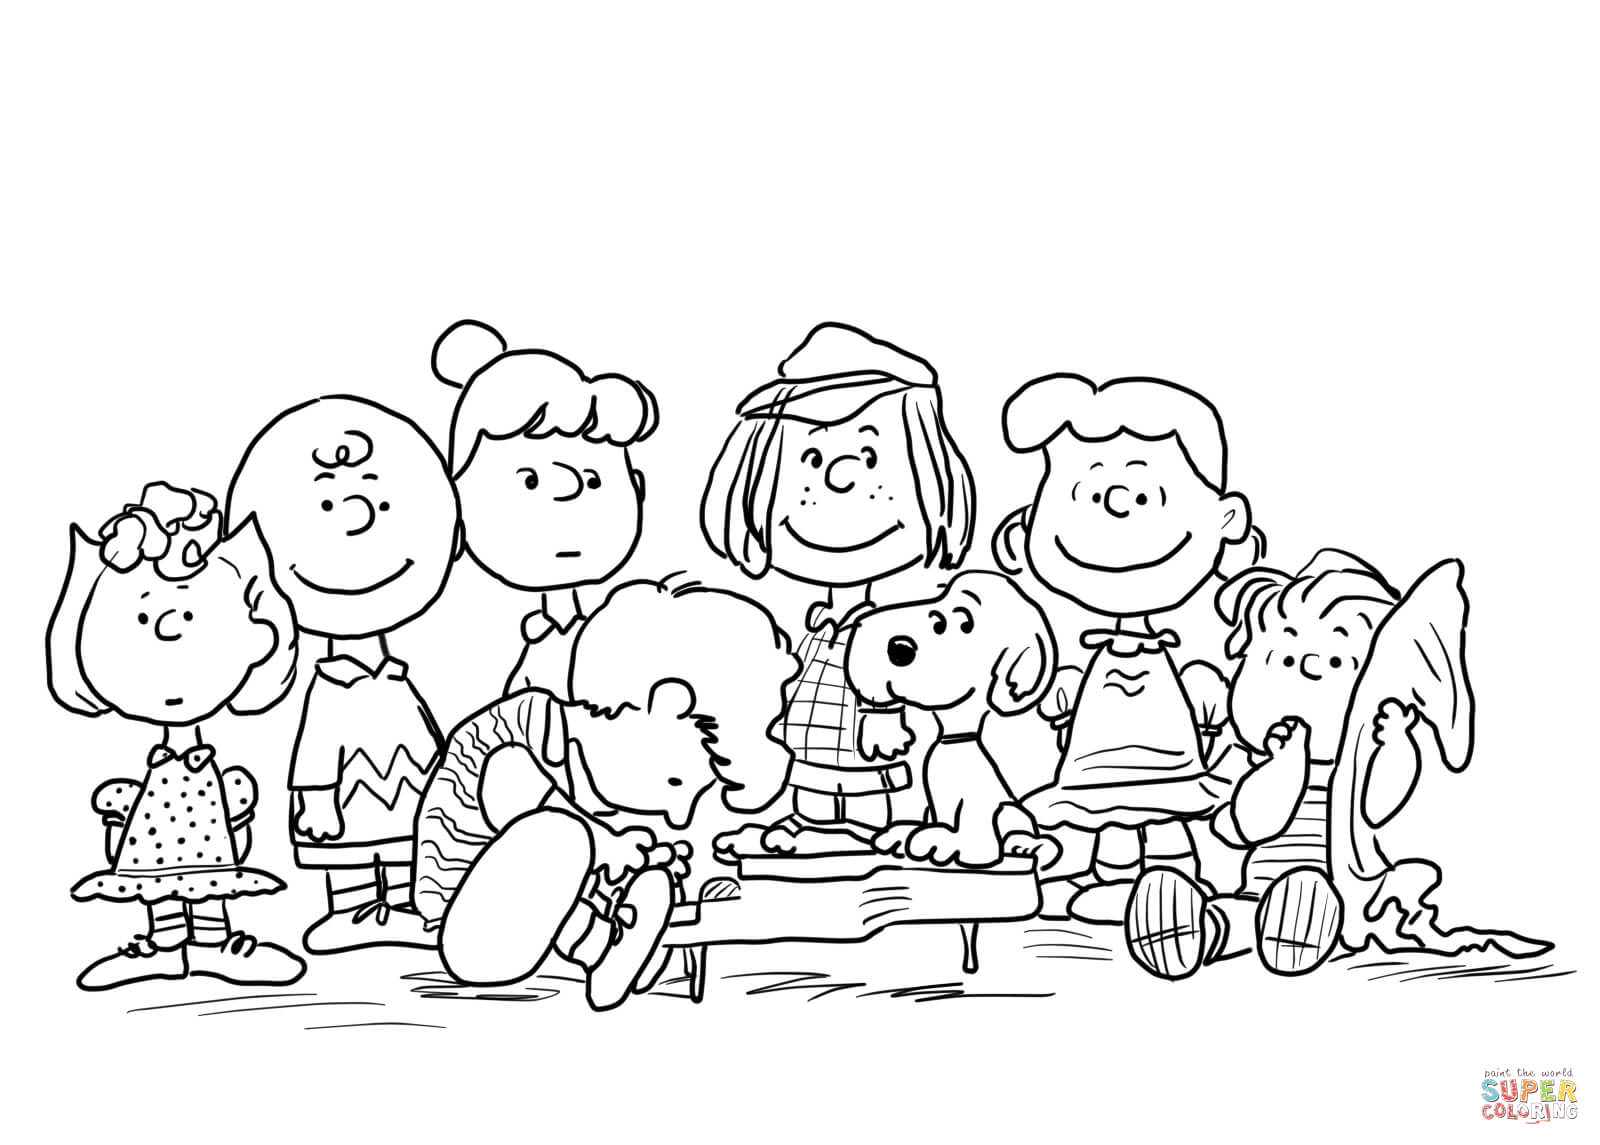 Peanuts characters coloring page free printable coloring pages